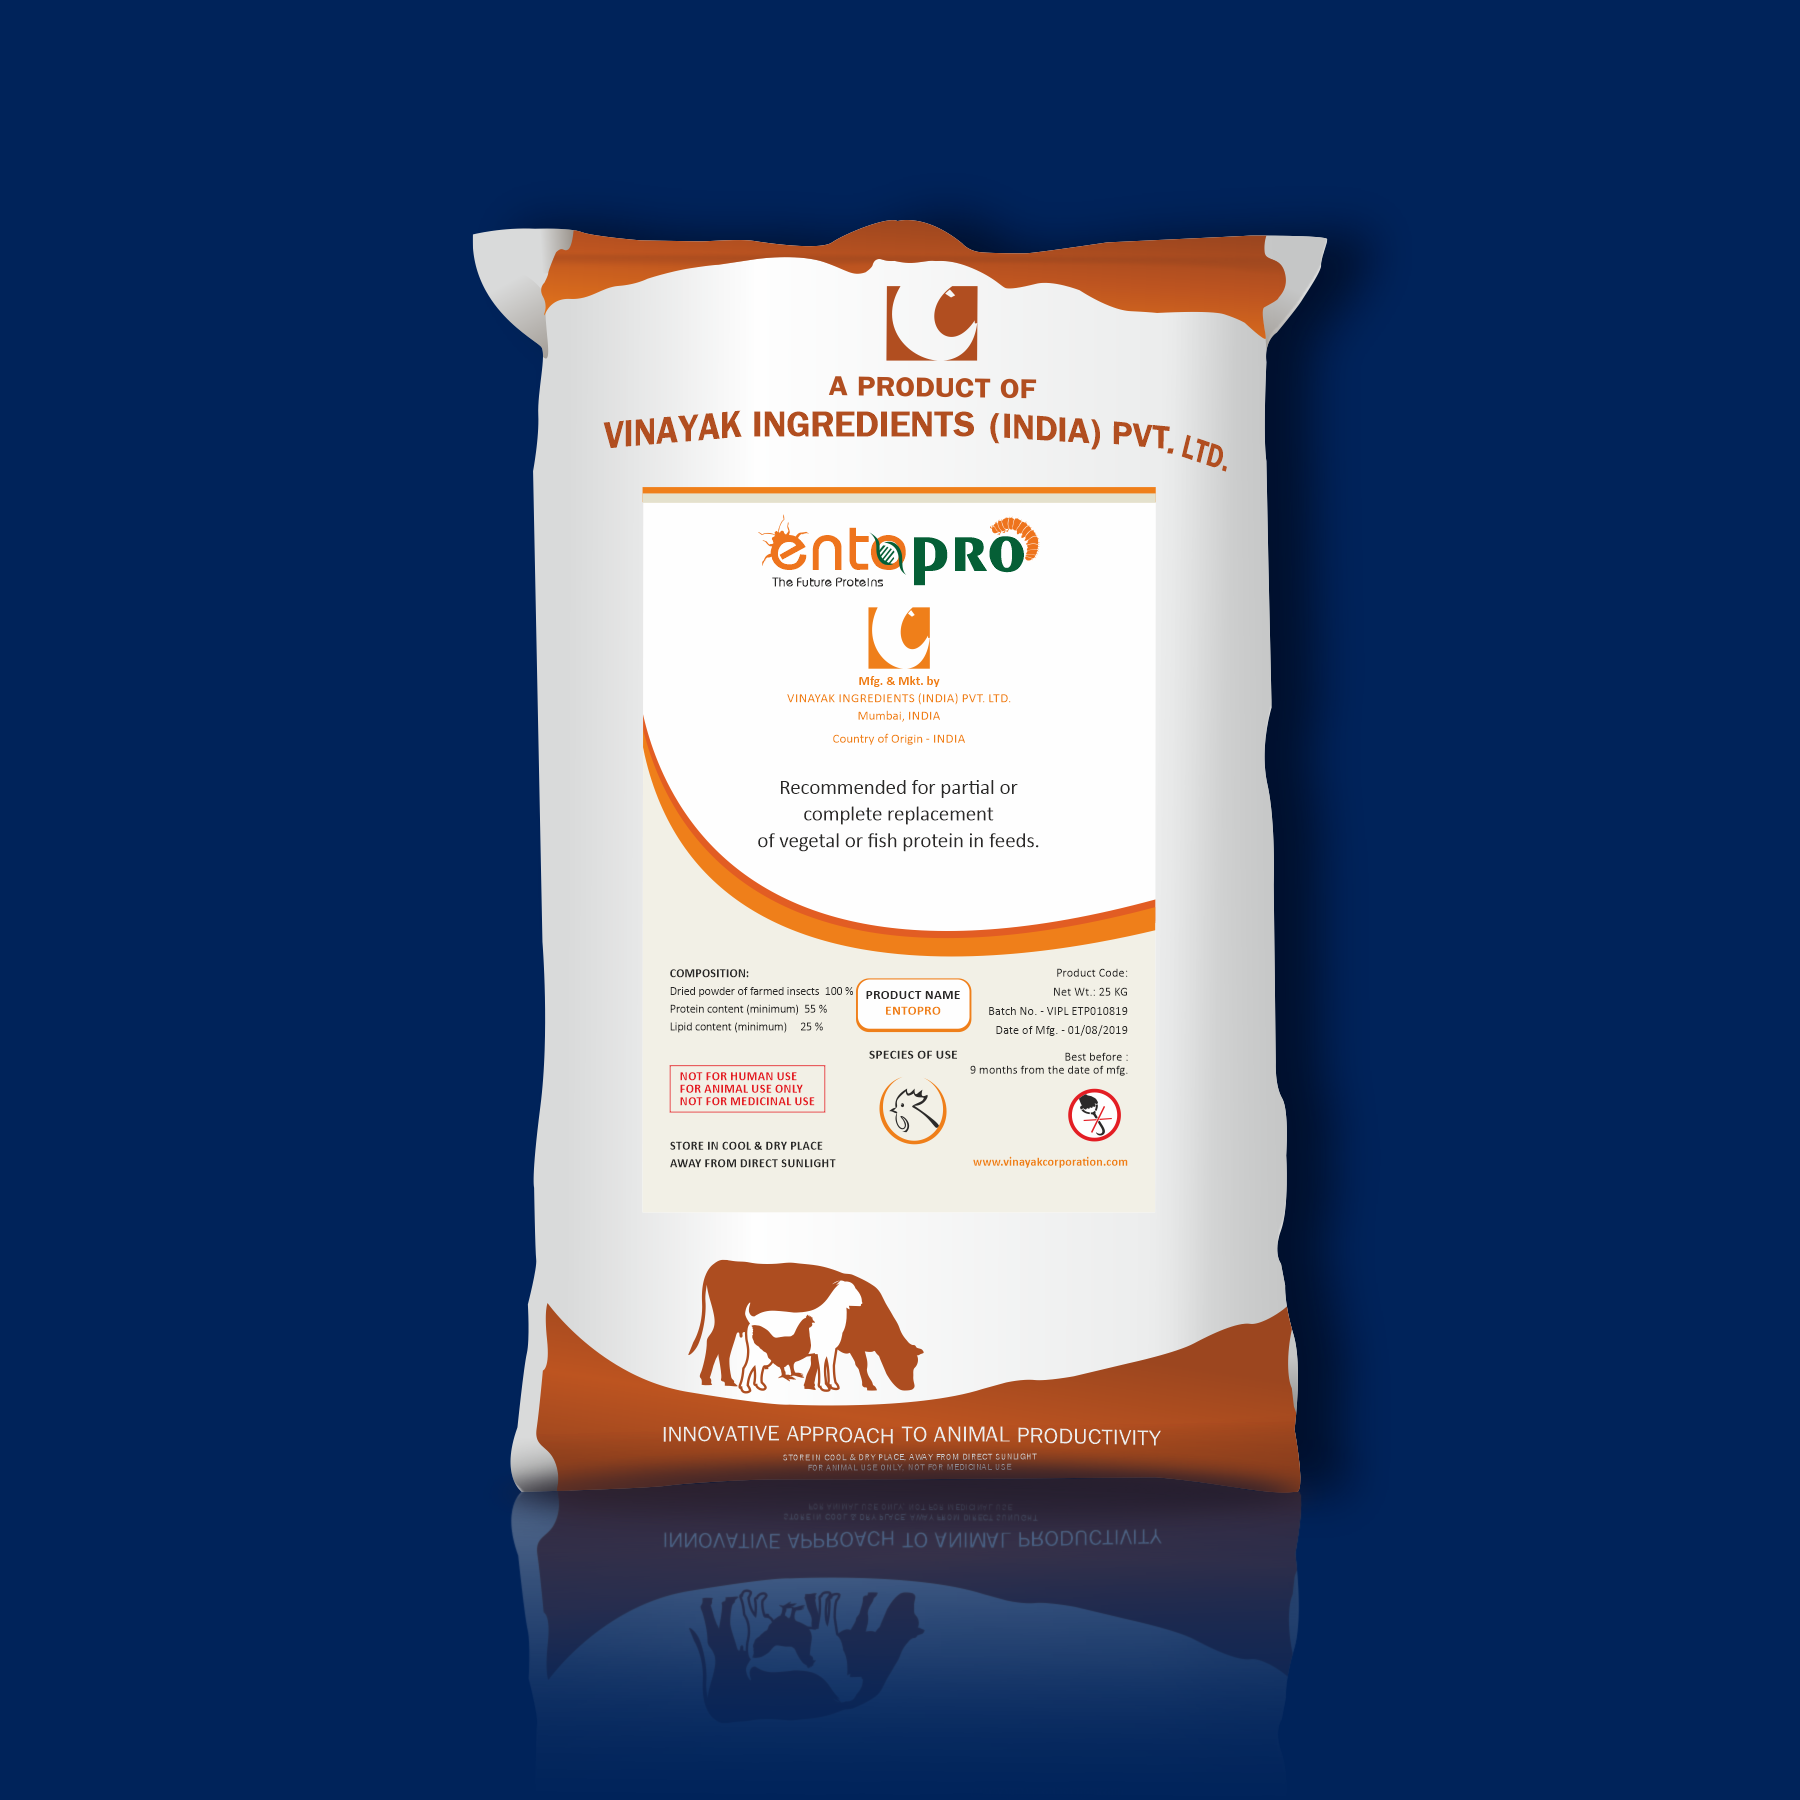 Entopro - Protein supplement for broilers - Insect protein for animal feed - amino acids for poultry - Entopro -The Future Protein- vinayak ingredient India